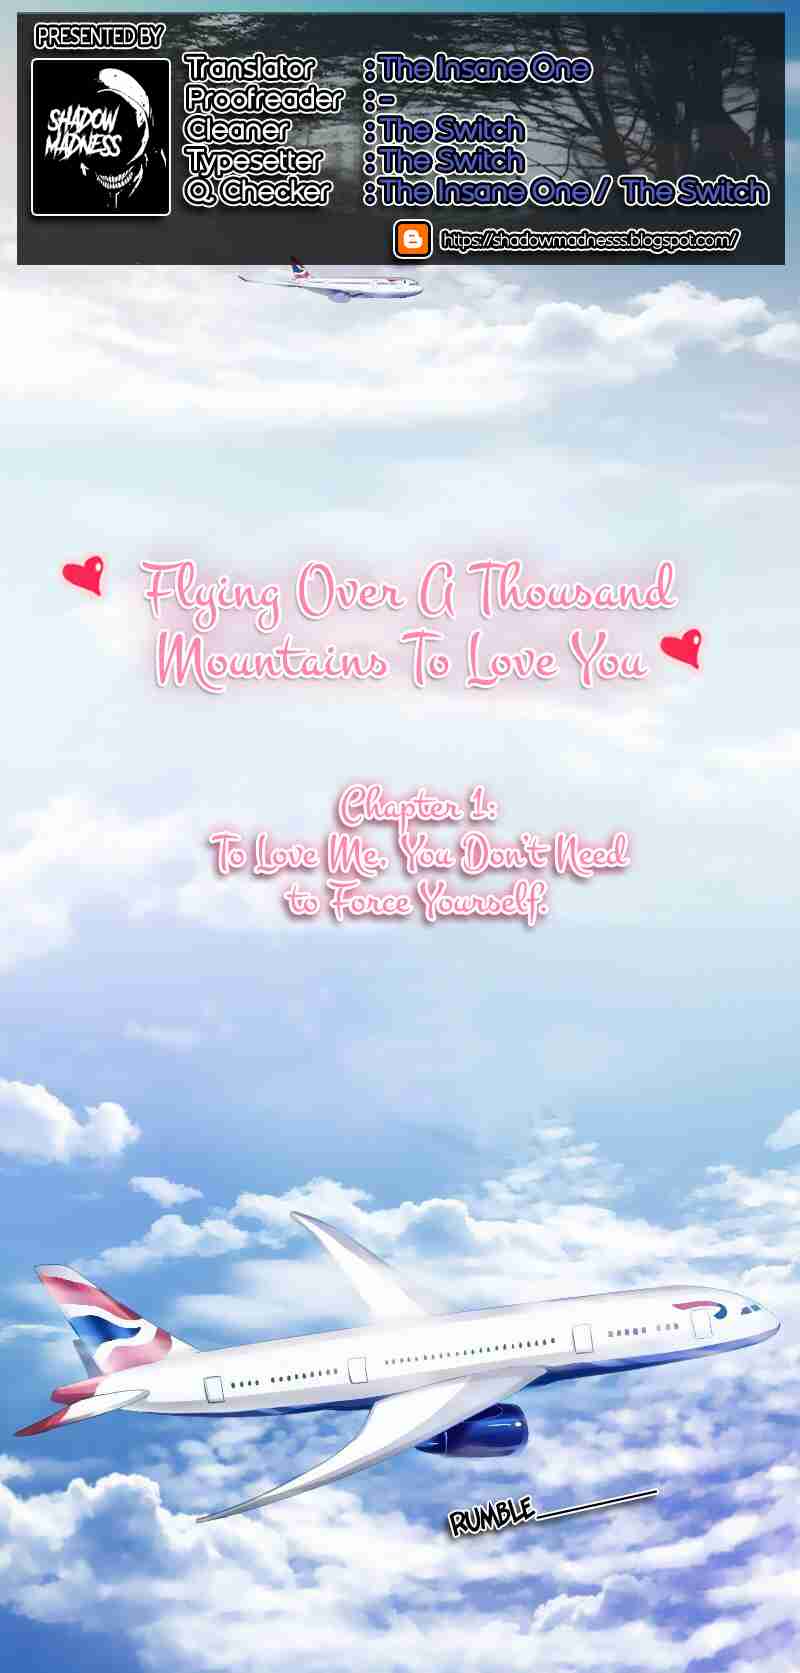 Flying Over a Thousand Mountains to Love You Ch. 1 To love me, you don't need to force yourself